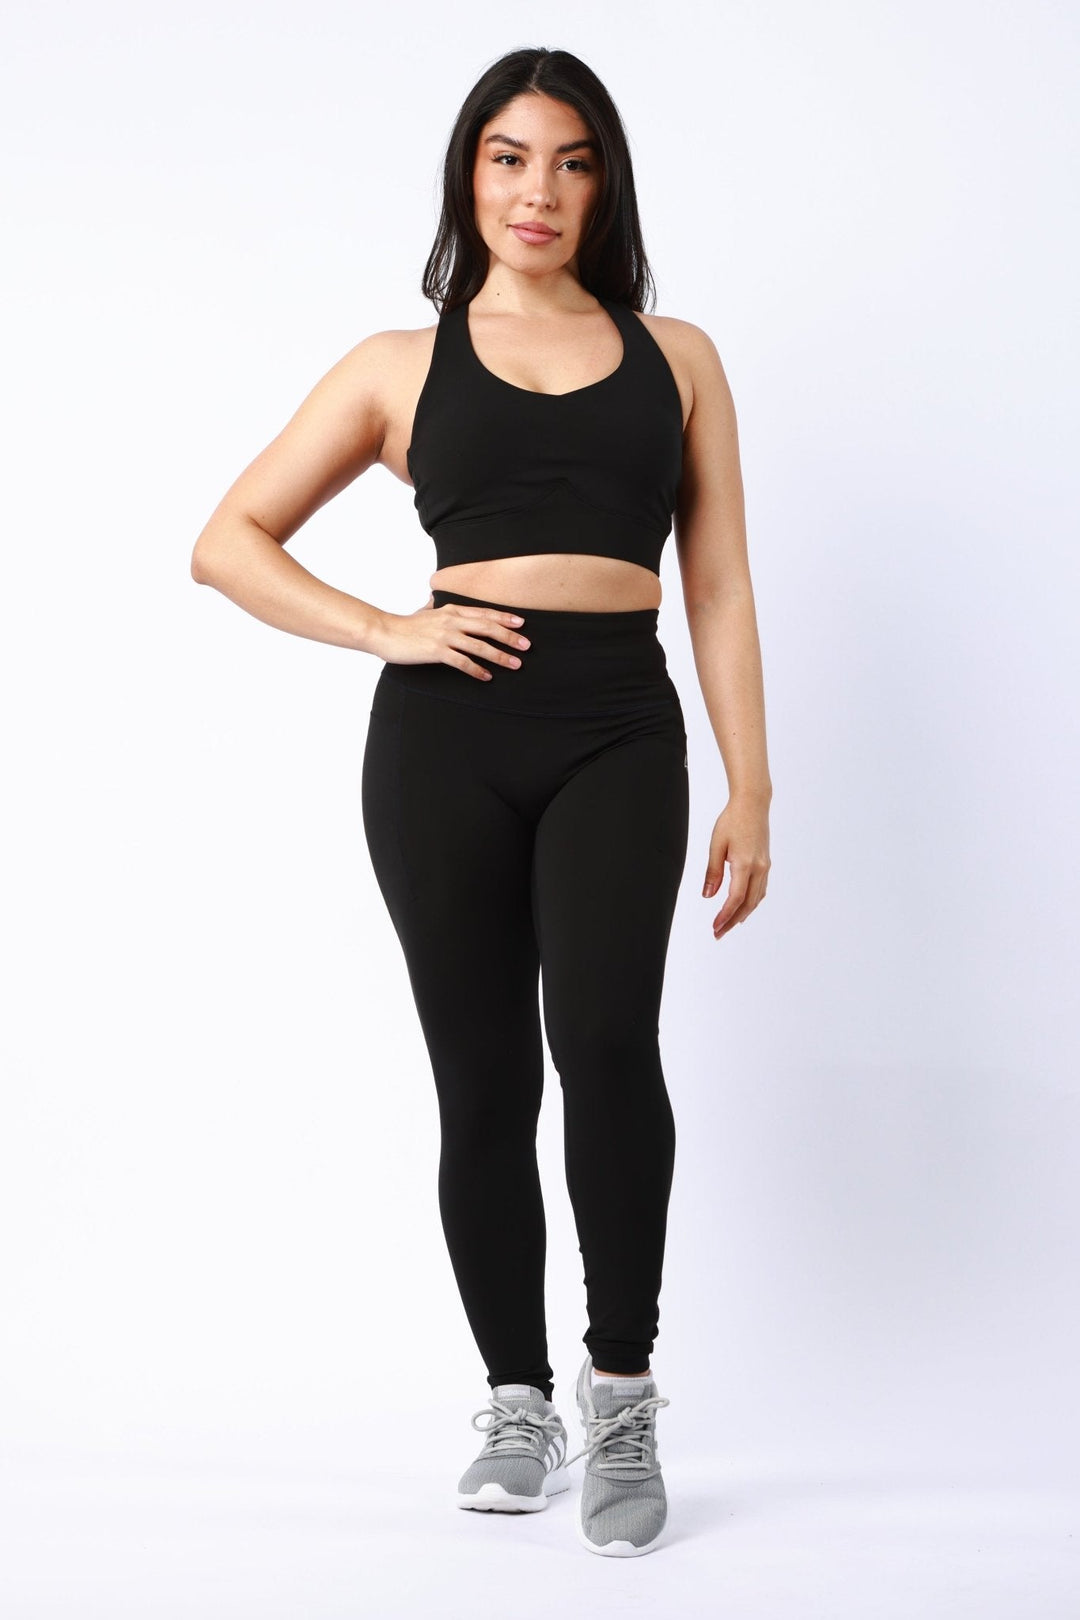 Athletic Women's Leggings With Pockets In Black - attivousa Free Shipping over $75 Womens Activewear Attivo